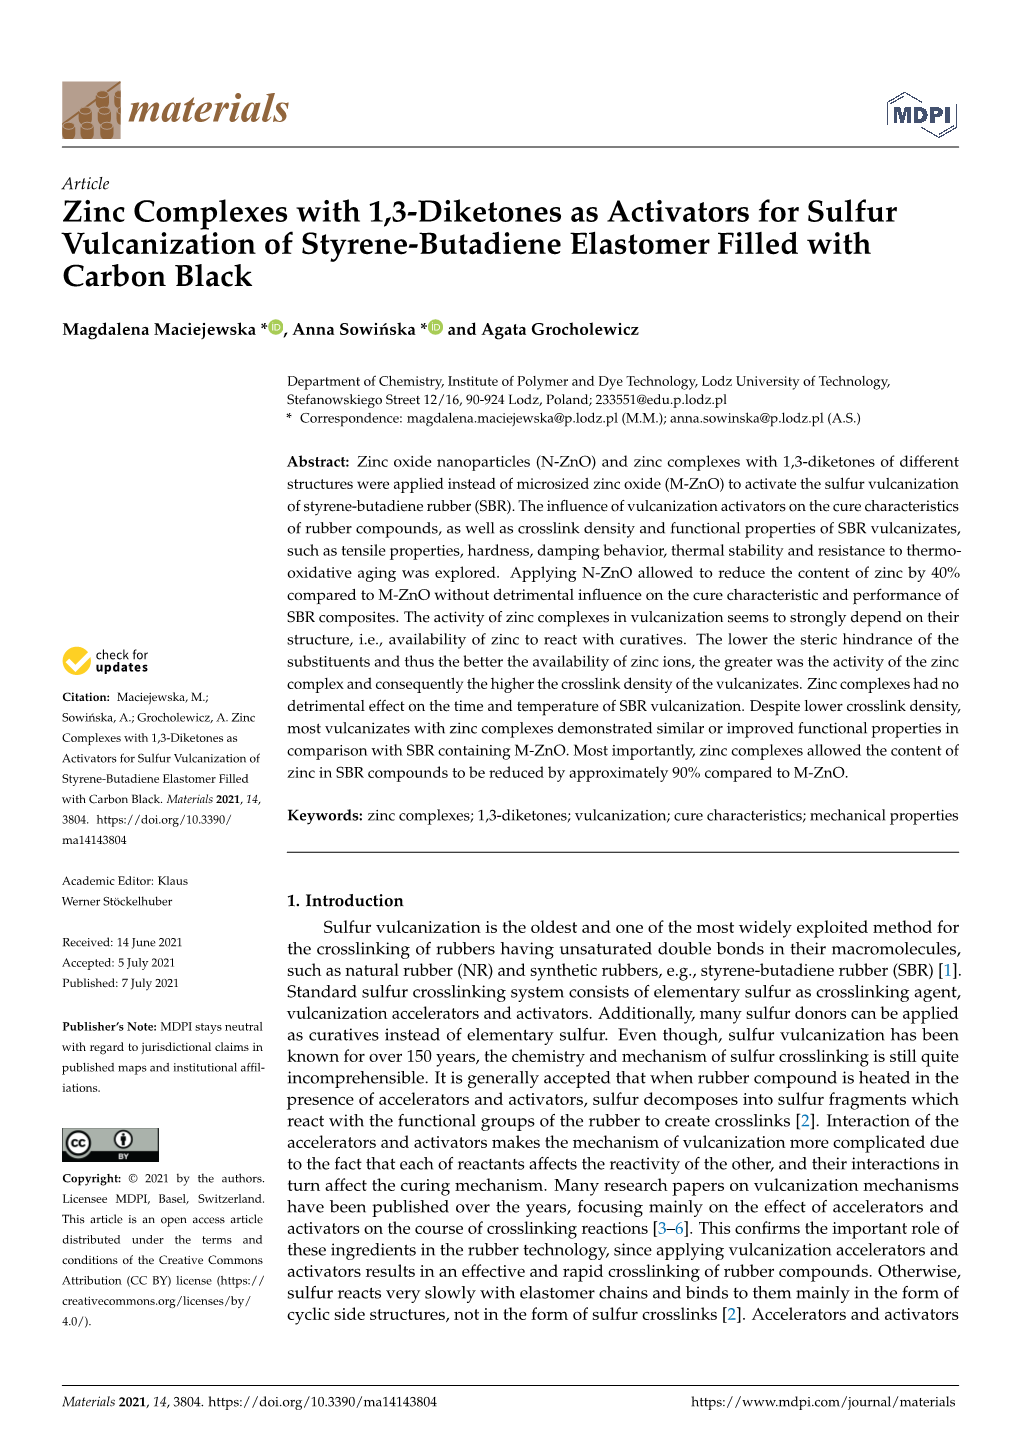 Zinc Complexes with 1,3-Diketones As Activators for Sulfur Vulcanization of Styrene-Butadiene Elastomer Filled with Carbon Black